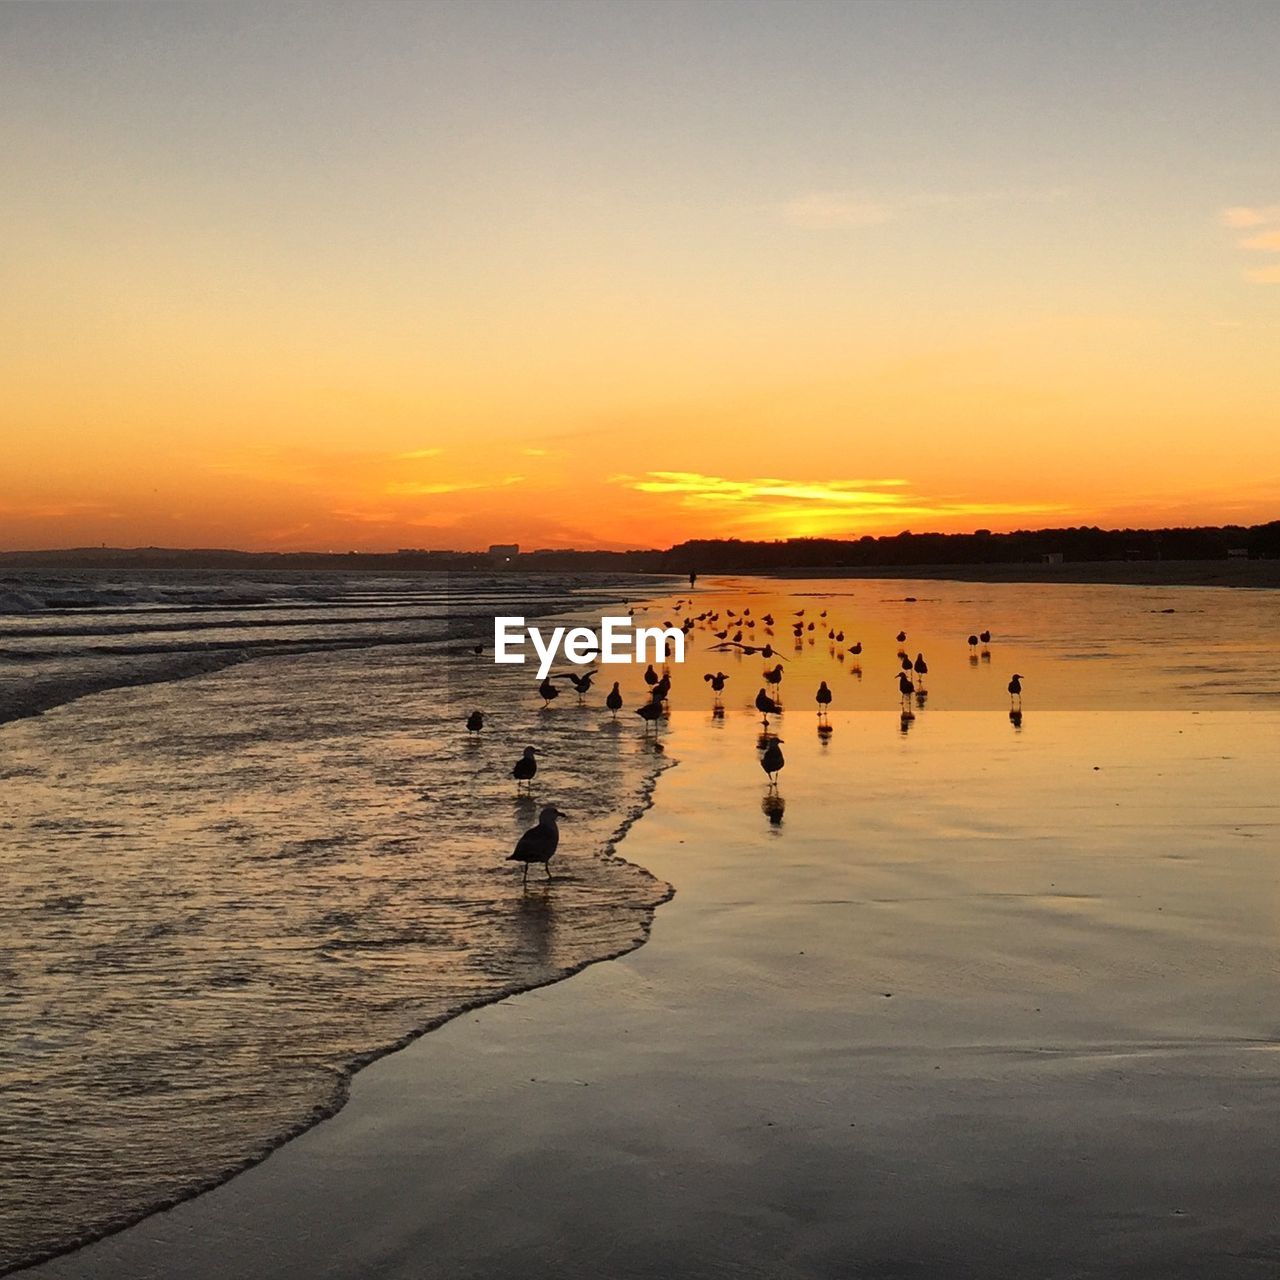 Seagulls on shore during sunset